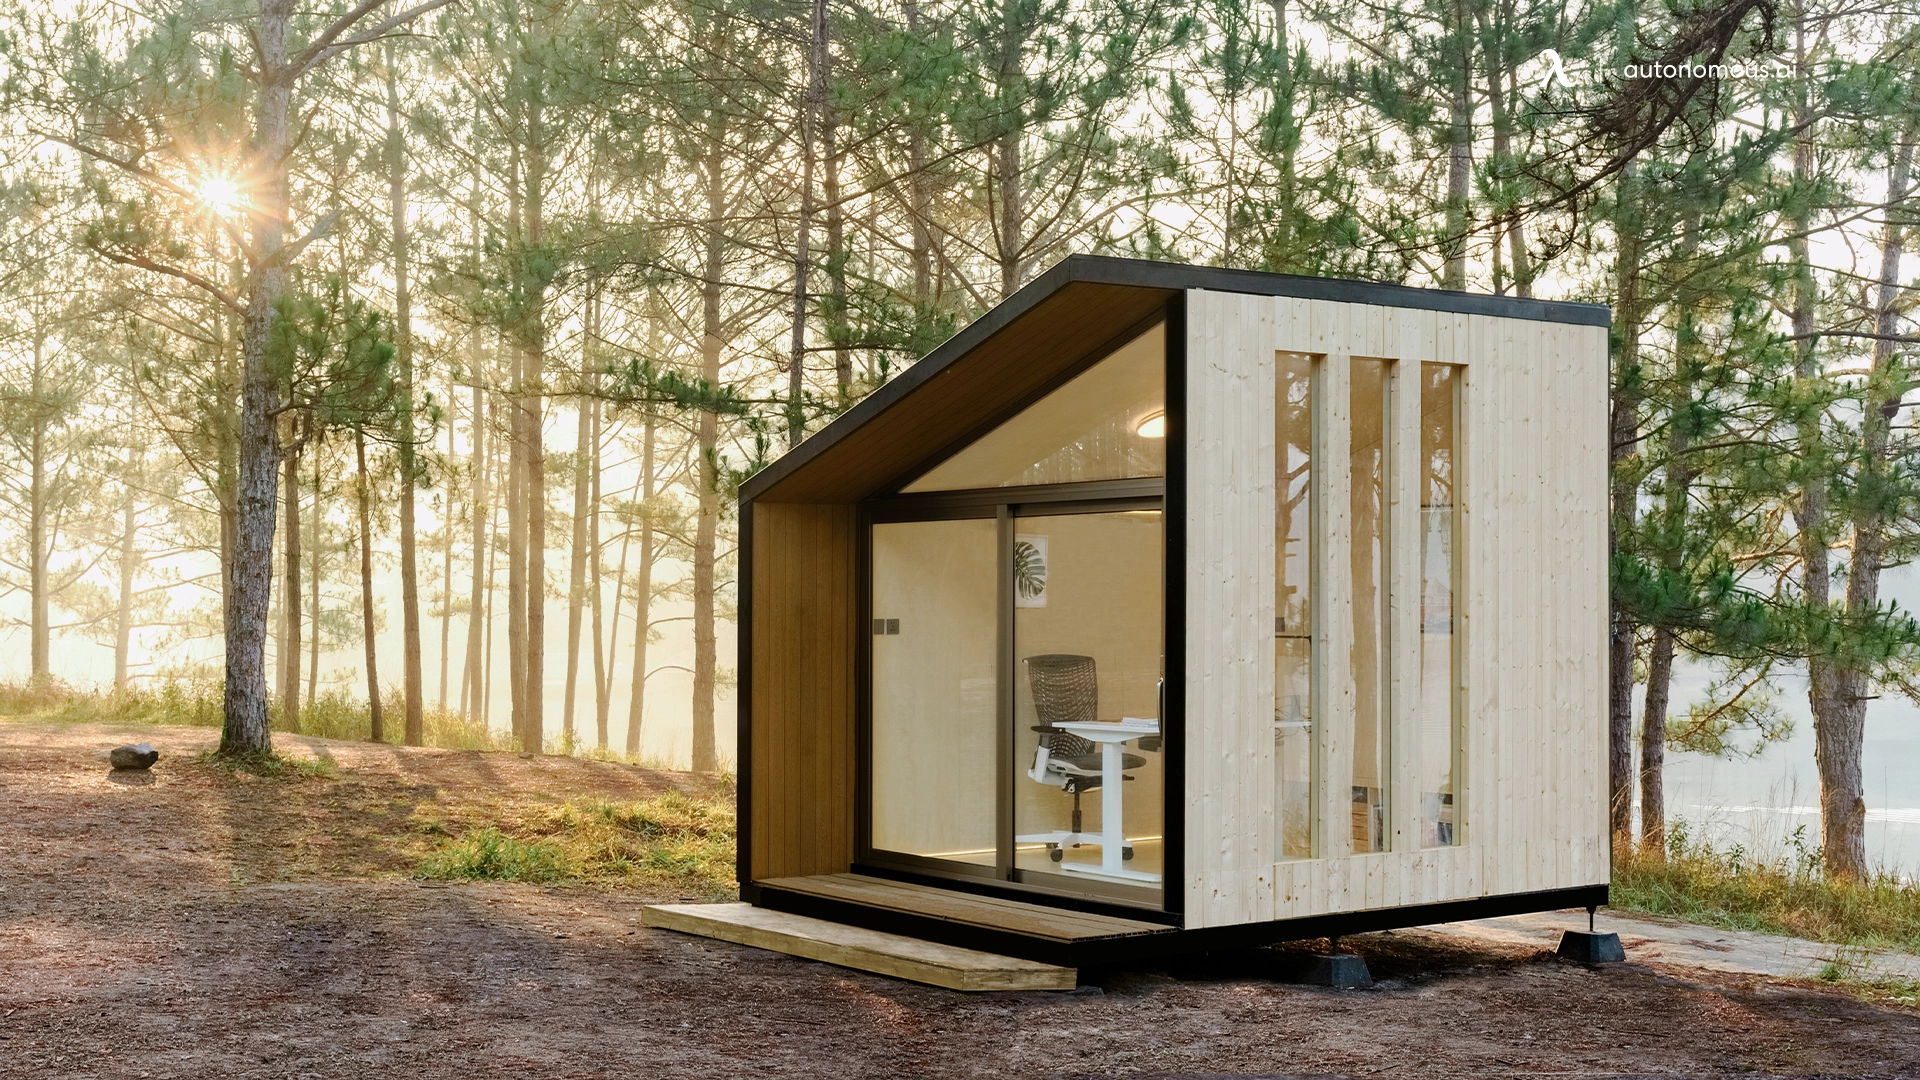 Can Modular Homes Be Built Anywhere?